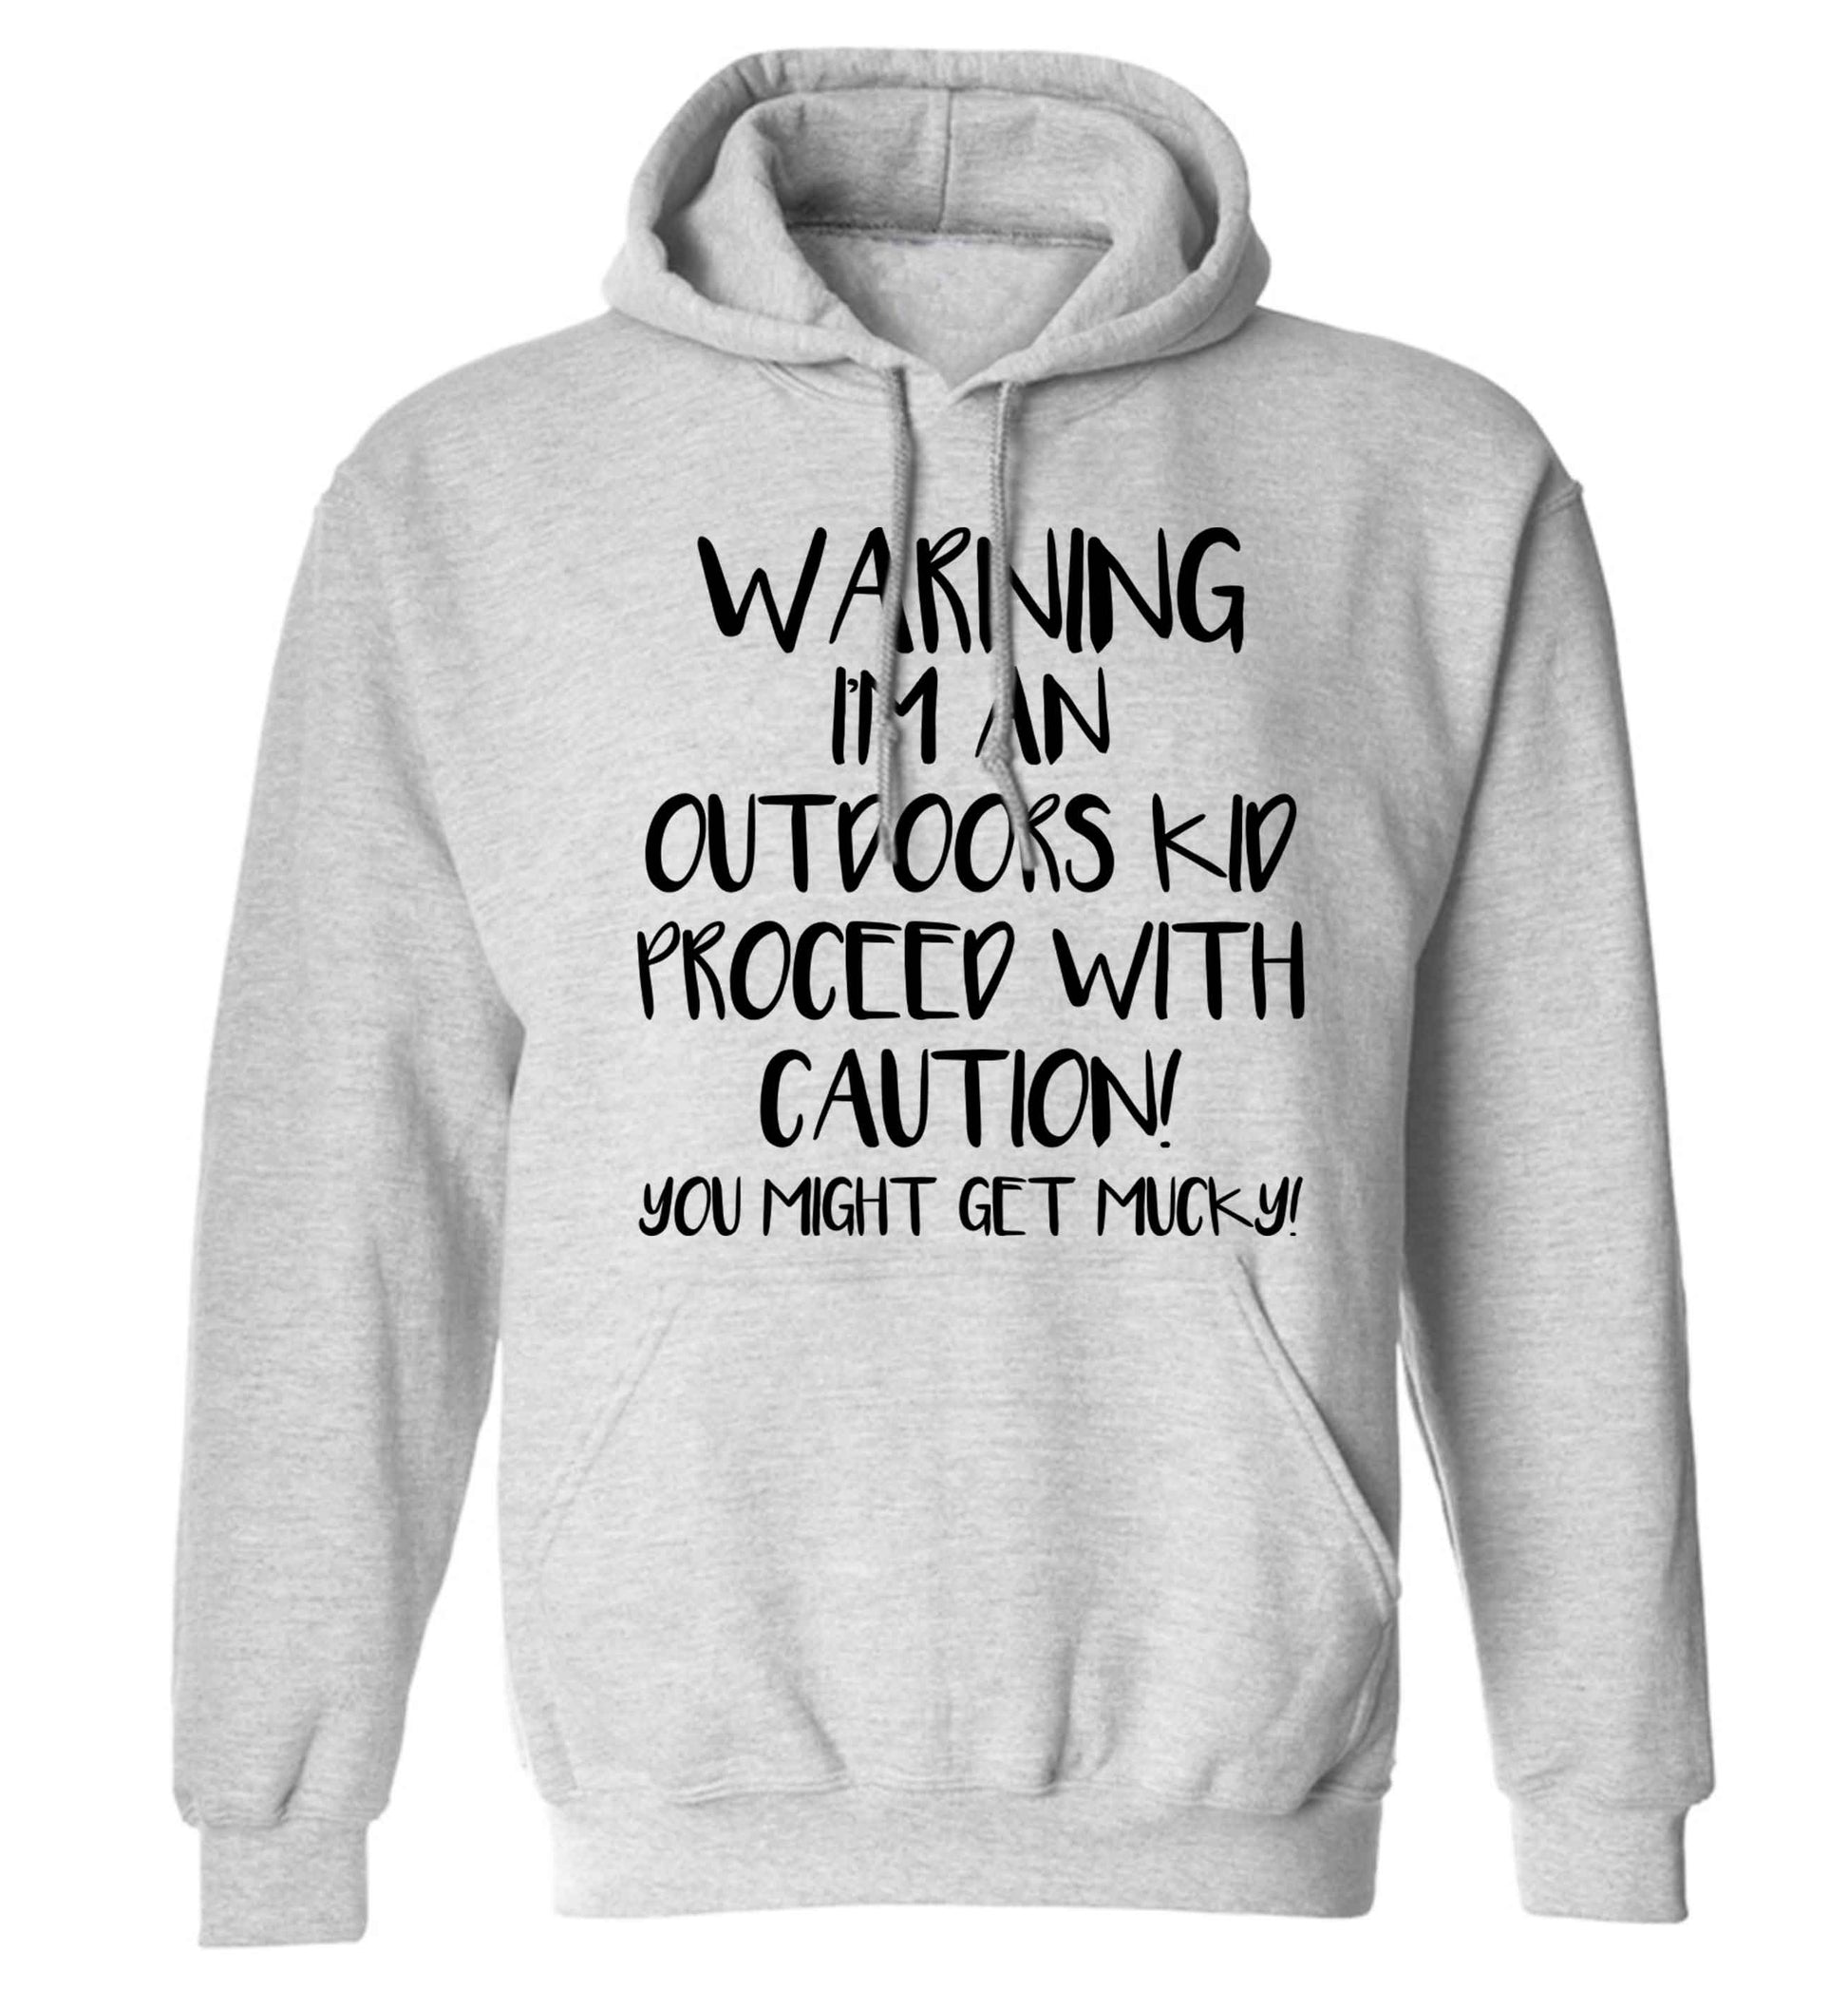 Warning I'm an outdoors kid! Proceed with caution you might get mucky adults unisex grey hoodie 2XL